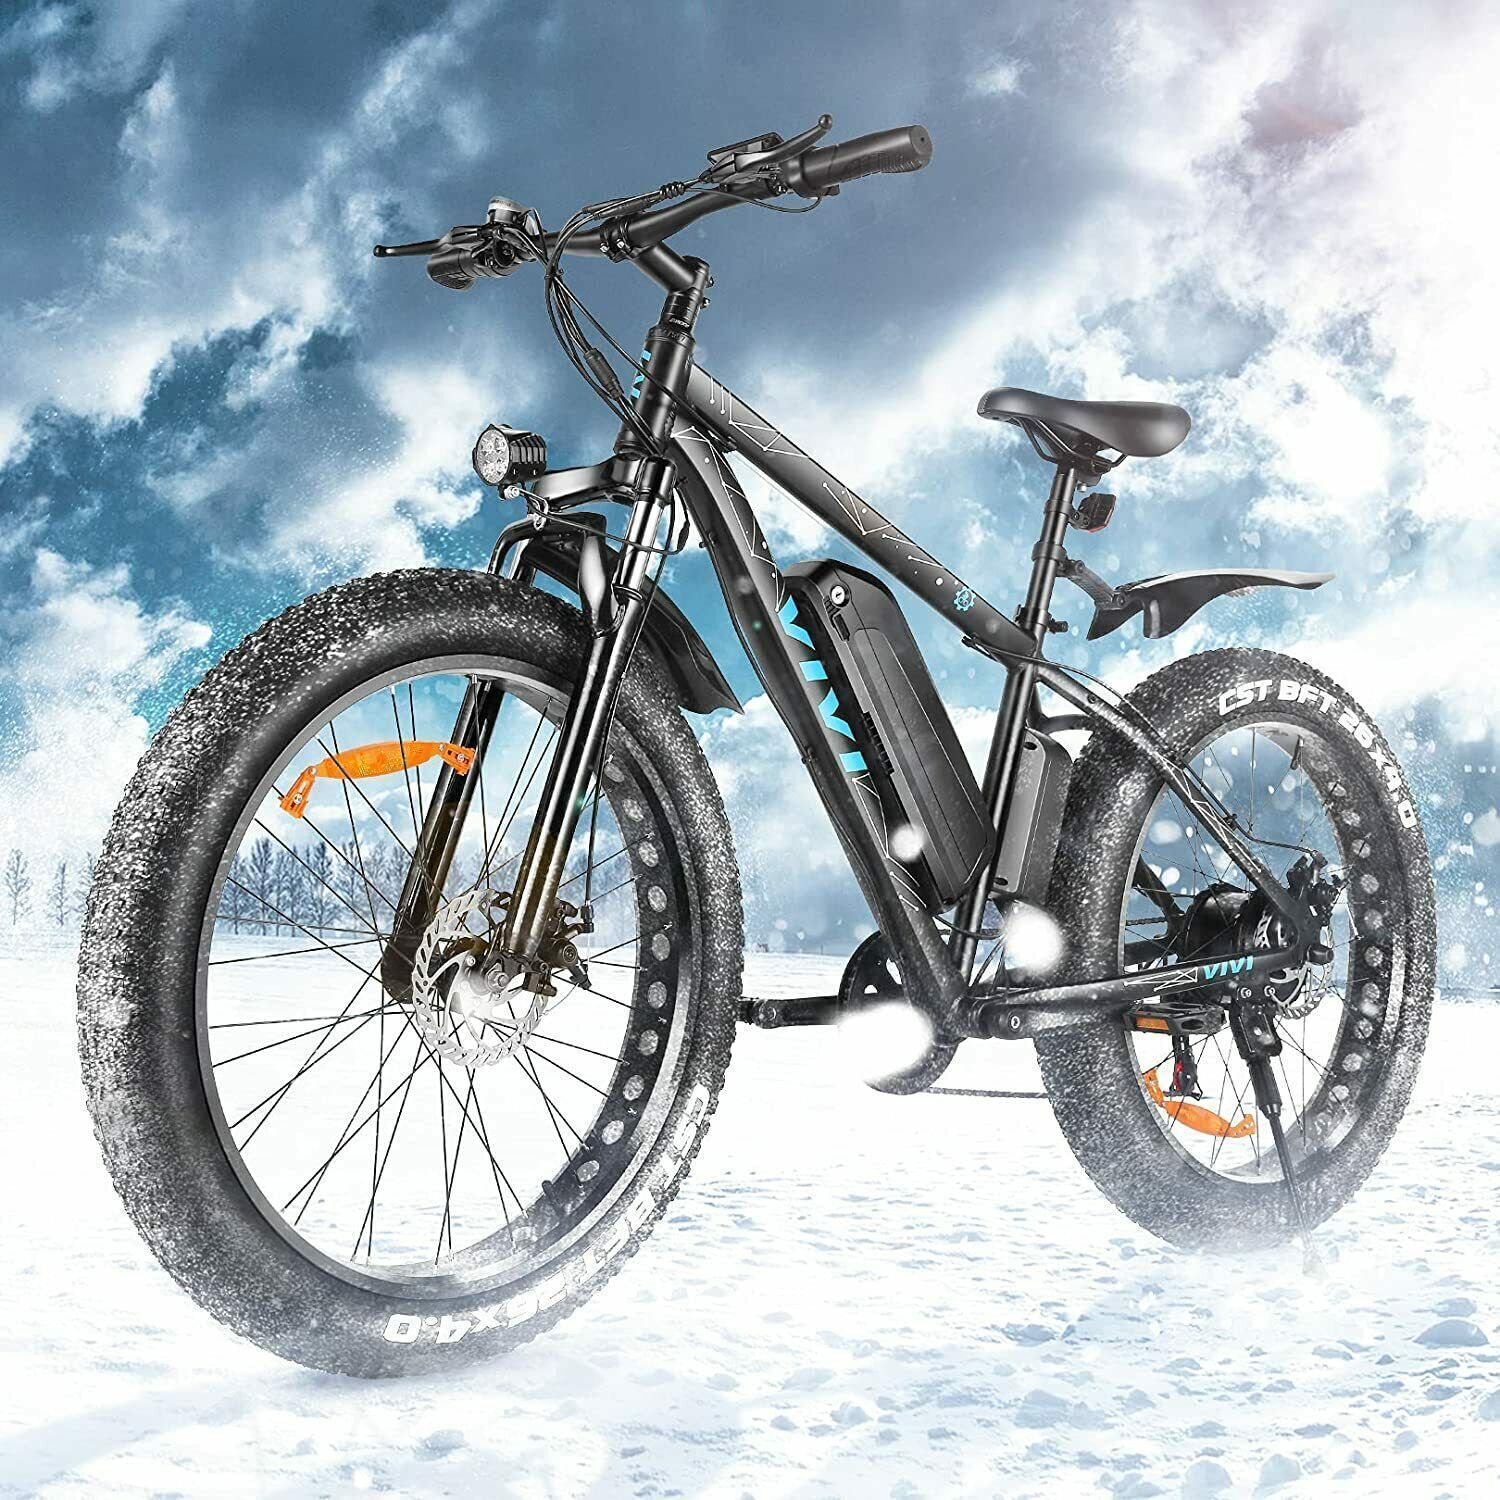 How to ride an electric bike in winter - useful tips